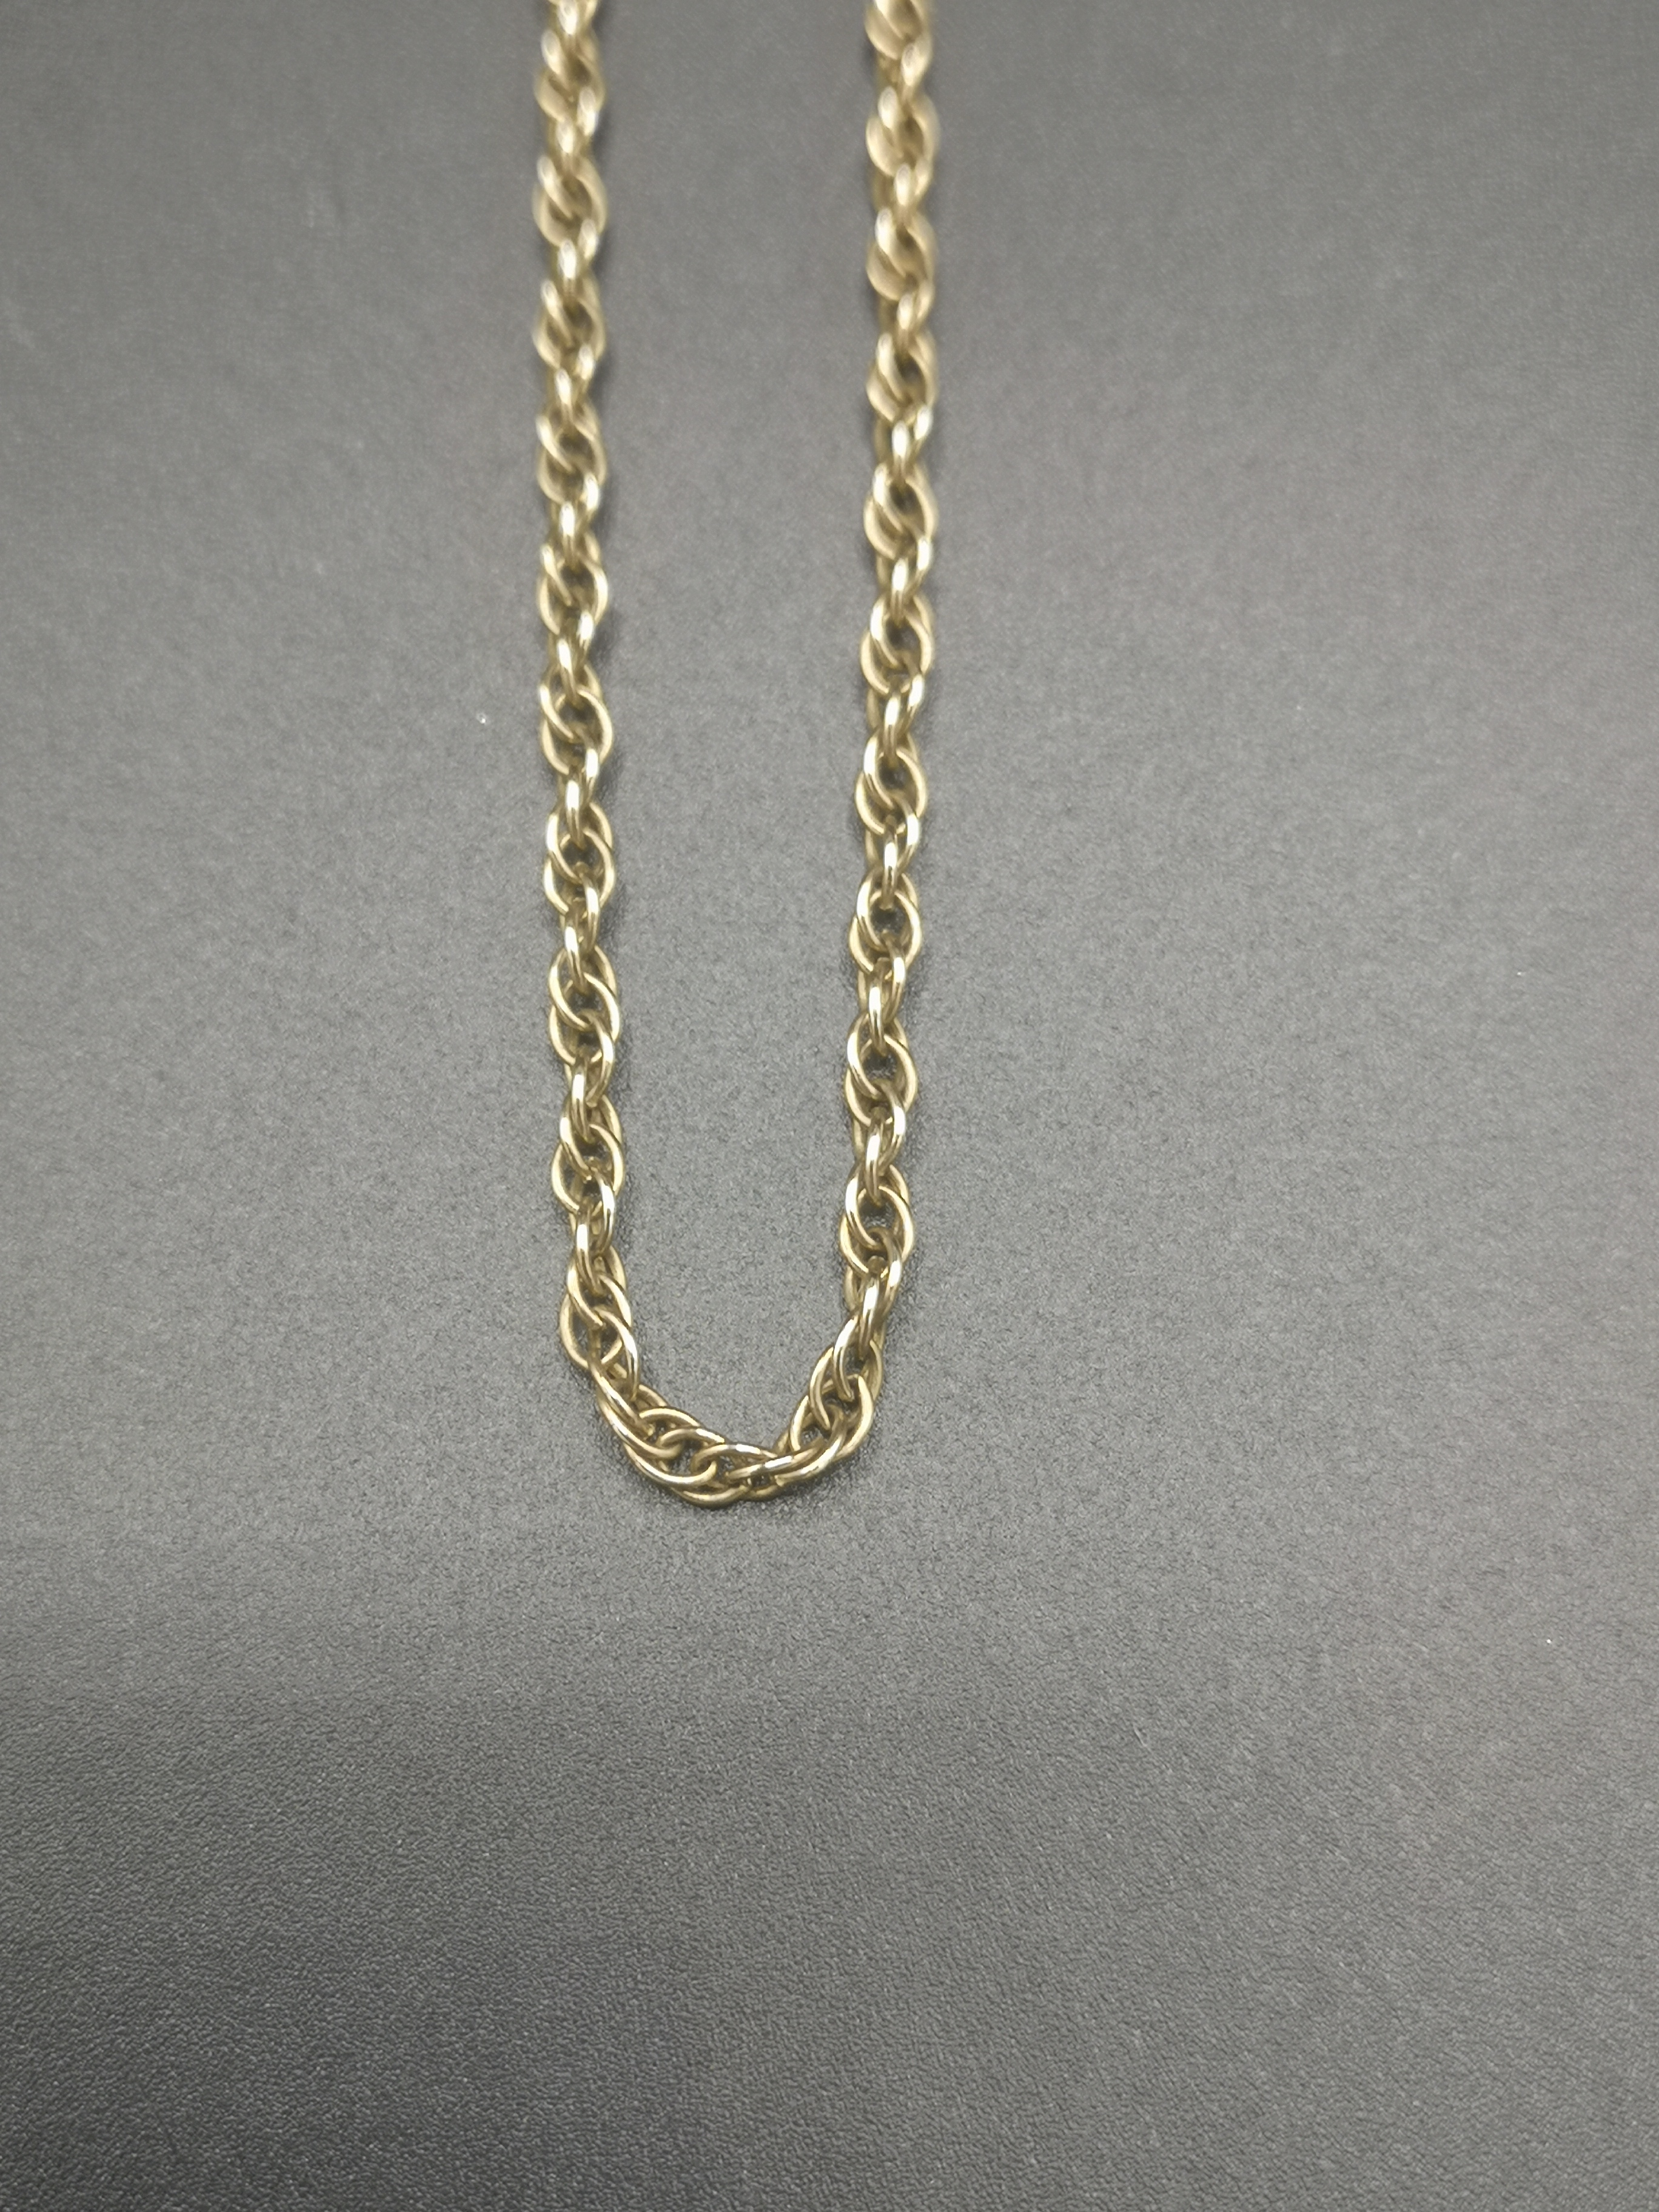 9ct gold necklace - Image 2 of 6